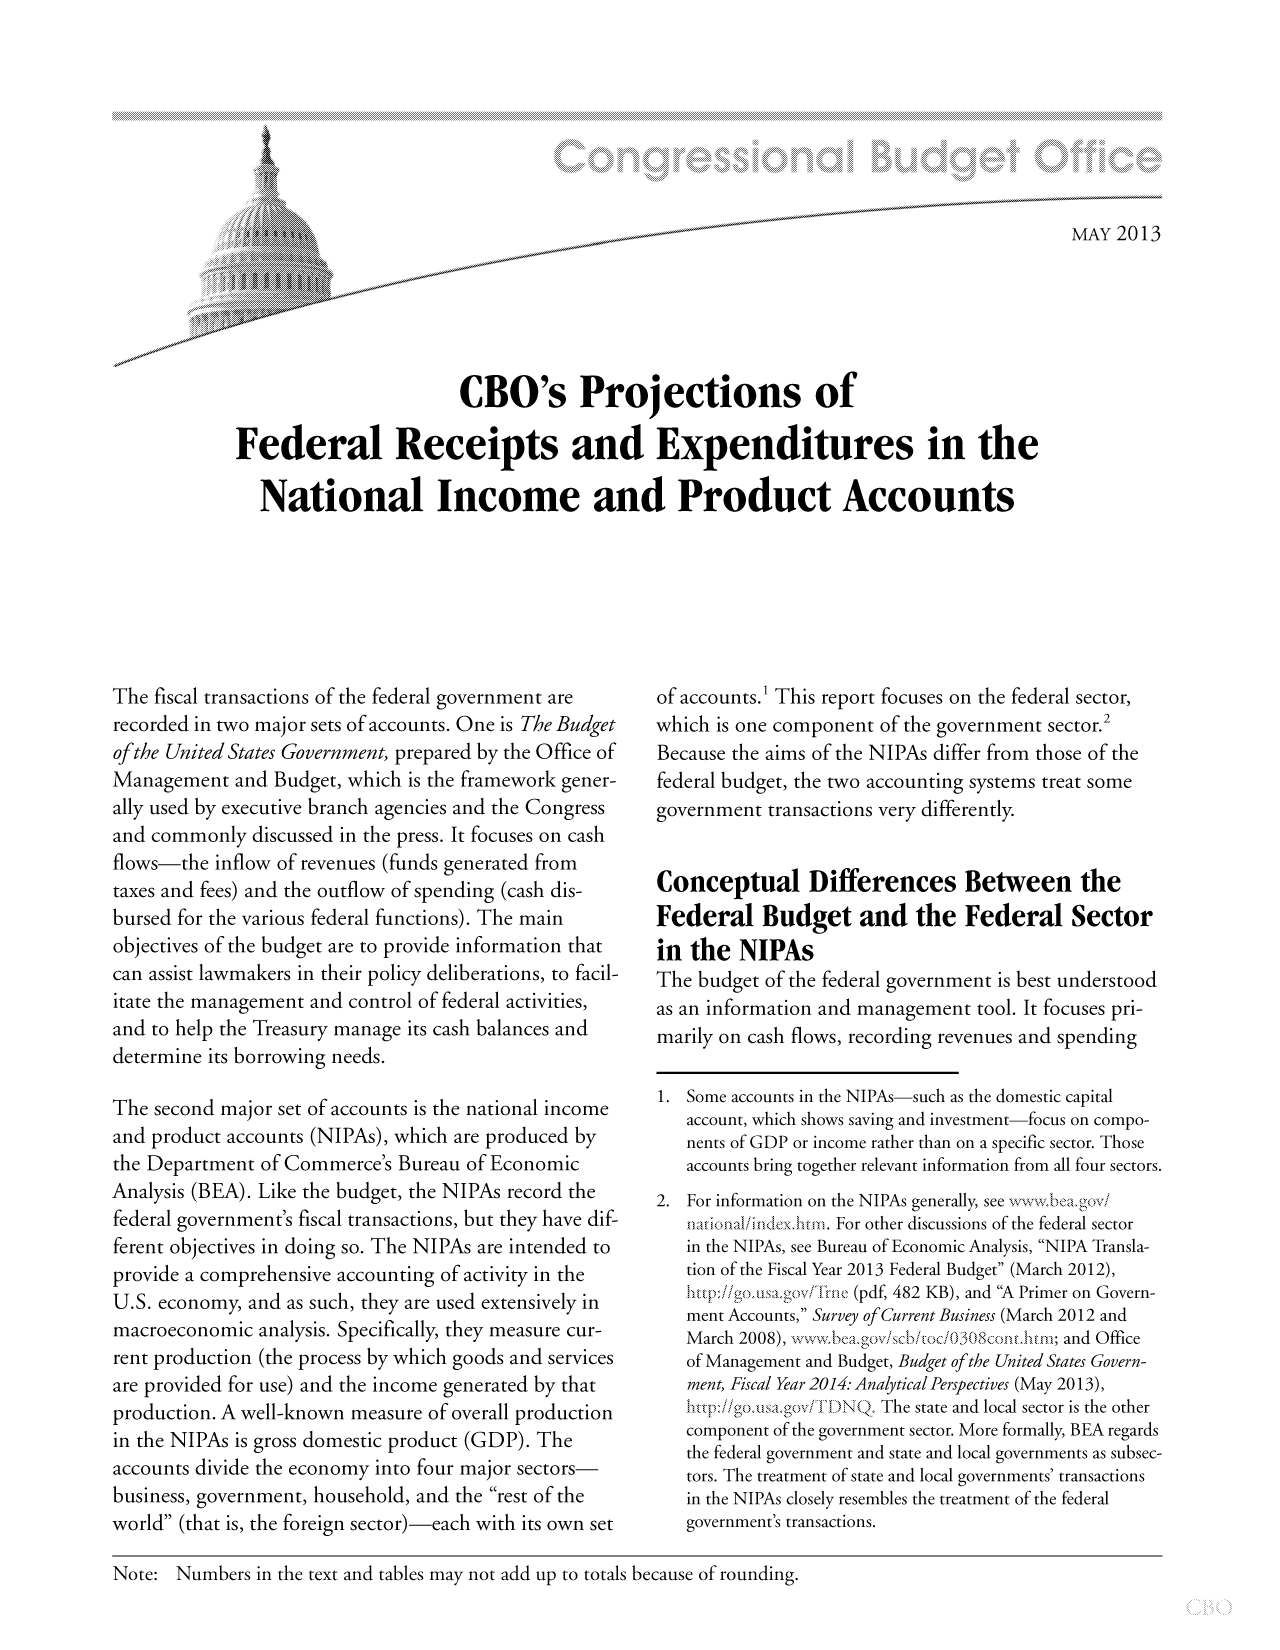 handle is hein.congrec/cbo11045 and id is 1 raw text is: MAY 2013
CBO's Projections of
Federal Receipts and Expenditures in the
National Income and Product Accounts

The fiscal transactions of the federal government are
recorded in two major sets of accounts. One is The Budget
of the United States Government, prepared by the Office of
Management and Budget, which is the framework gener-
ally used by executive branch agencies and the Congress
and commonly discussed in the press. It focuses on cash
flows-the inflow of revenues (funds generated from
taxes and fees) and the outflow of spending (cash dis-
bursed for the various federal functions). The main
objectives of the budget are to provide information that
can assist lawmakers in their policy deliberations, to facil-
itate the management and control of federal activities,
and to help the Treasury manage its cash balances and
determine its borrowing needs.
The second major set of accounts is the national income
and product accounts (NIPAs), which are produced by
the Department of Commerce's Bureau of Economic
Analysis (BEA). Like the budget, the NIPAs record the
federal government's fiscal transactions, but they have dif-
ferent objectives in doing so. The NIPAs are intended to
provide a comprehensive accounting of activity in the
U.S. economy, and as such, they are used extensively in
macroeconomic analysis. Specifically, they measure cur-
rent production (the process by which goods and services
are provided for use) and the income generated by that
production. A well-known measure of overall production
in the NIPAs is gross domestic product (GDP). The
accounts divide the economy into four major sectors
business, government, household, and the rest of the
world (that is, the foreign sector)-each with its own set

of accounts.' This report focuses on the federal sector,
which is one component of the government sector.2
Because the aims of the NIPAs differ from those of the
federal budget, the two accounting systems treat some
government transactions very differently.
Conceptual Differences Between the
Federal Budget and the Federal Sector
in the NIPAs
The budget of the federal government is best understood
as an information and management tool. It focuses pri-
marily on cash flows, recording revenues and spending
1. Some accounts in the NIPAs-such as the domestic capital
account, which shows saving and investment-focus on compo-
nents of GDP or income rather than on a specific sector. Those
accounts bring together relevant information from all four sectors.
2. For information on the NIPAs generally, see www.bea~gov/
For other discussions of the federal sector
in the NIPAs, see Bureau of Economic Analysis, NIPA Transla-
tion of the Fiscal Year 2013 Federal Budget (March 2012),
(pdf, 482 KB), and A Primer on Govern-
ment Accounts, Survey of Current Business (March 2012 and
March 2008), www bea.gov/seb/c/0308cont.htn; and Office
of Management and Budget, Budget ofthe United States Govern-
ment, Fiscal Year 2014: Analytical Perspectives (May 2013),
http://go.usa.gov/rDNQ.The state and local sector is the other
component of the government sector. More formally, BEA regards
the federal government and state and local governments as subsec-
tors. The treatment of state and local governments' transactions
in the NIPAs closely resembles the treatment of the federal
government's transactions.

Note: Numbers in the text and tables may not add up to totals because of rounding.


